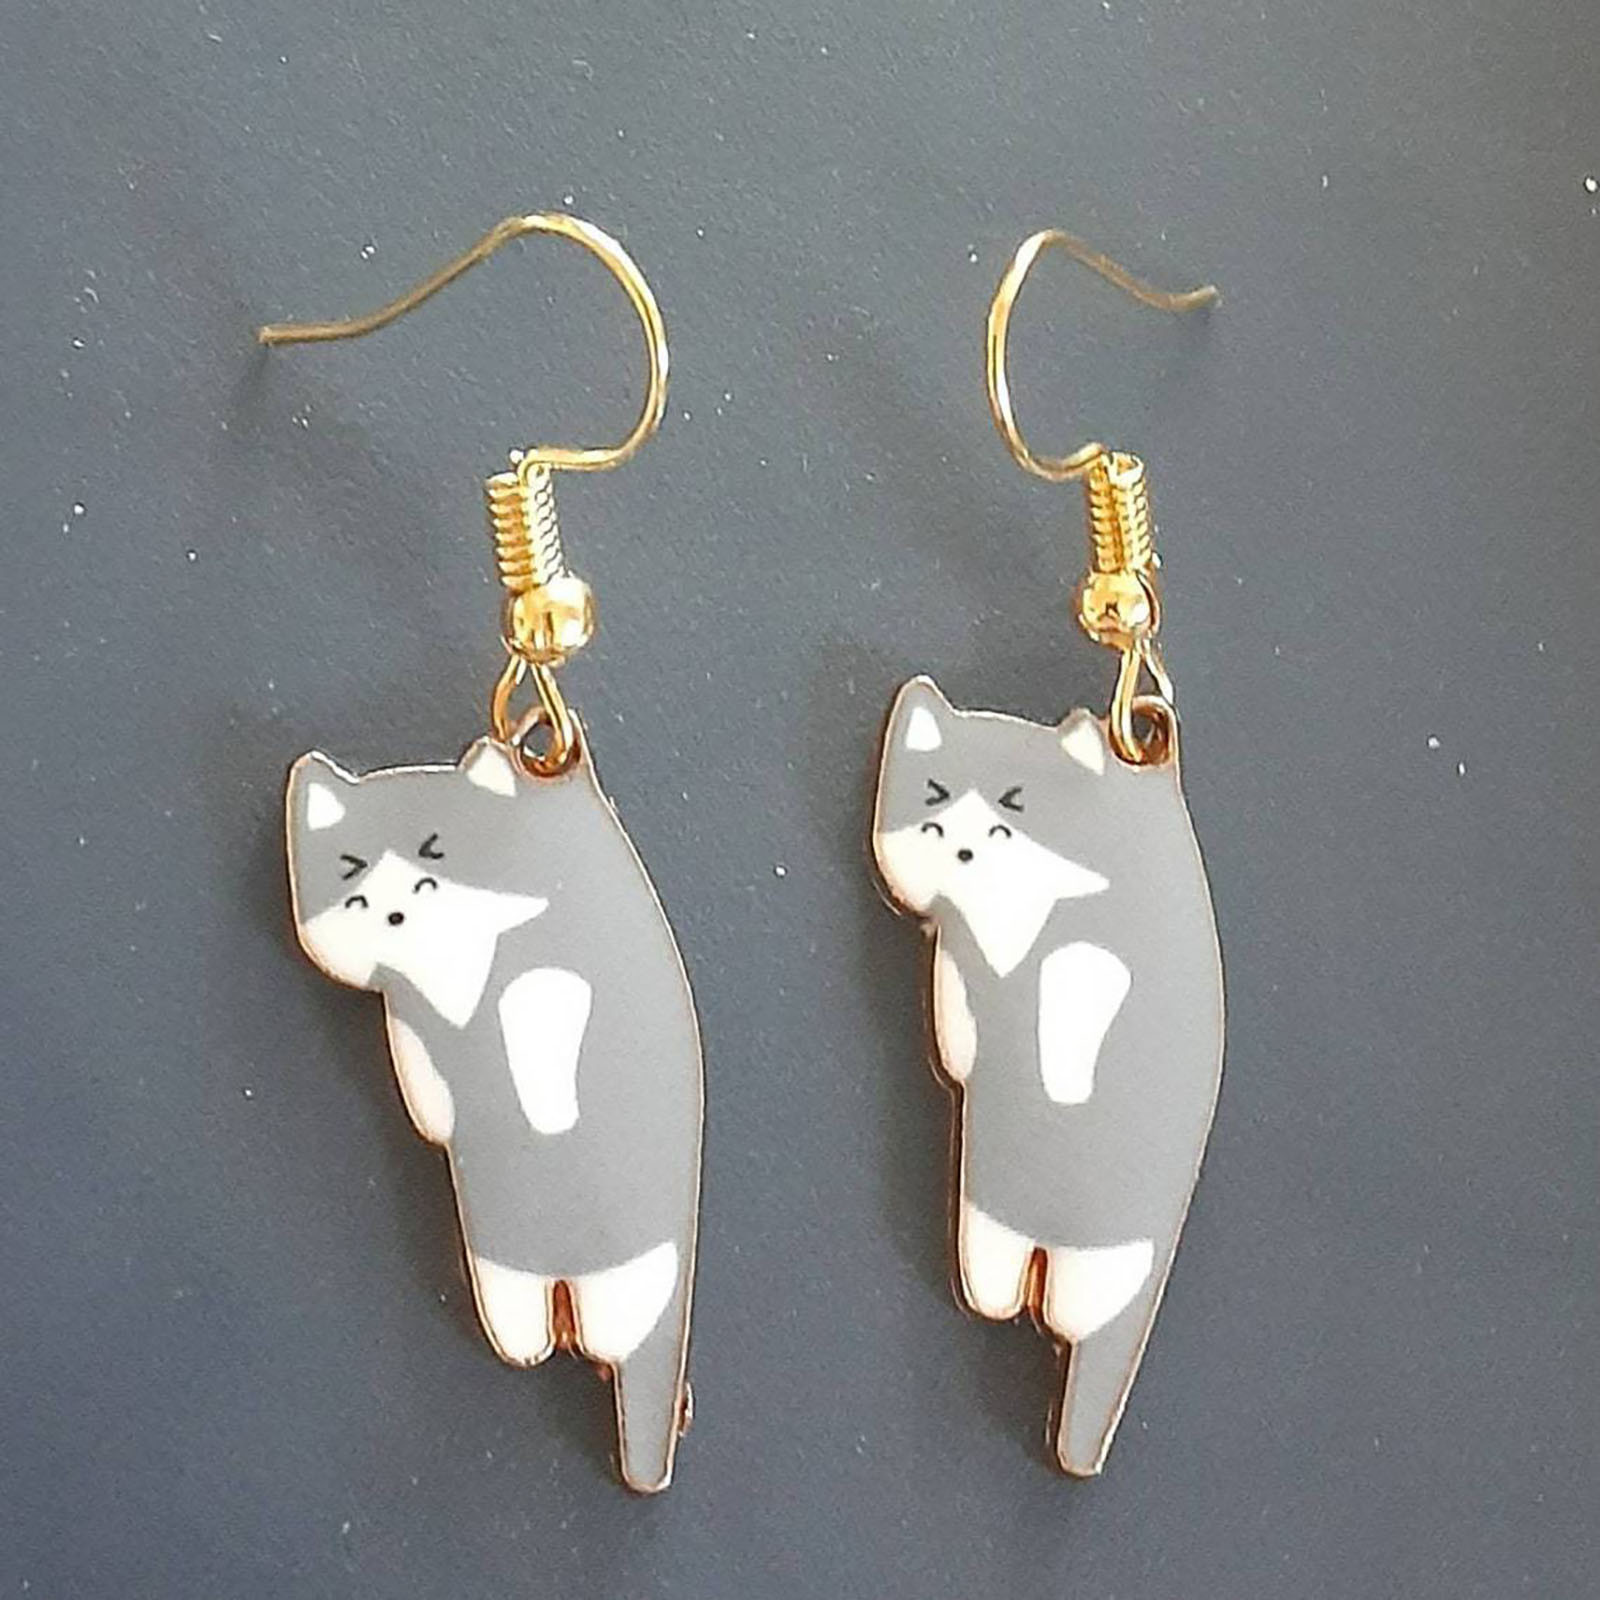 Kayannuo Clearance Cute Cat Dangle Earrings Dangle Cat Earrings Alloy Drop Earrings With Hypoallergenic French Hook Animal - image 3 of 3